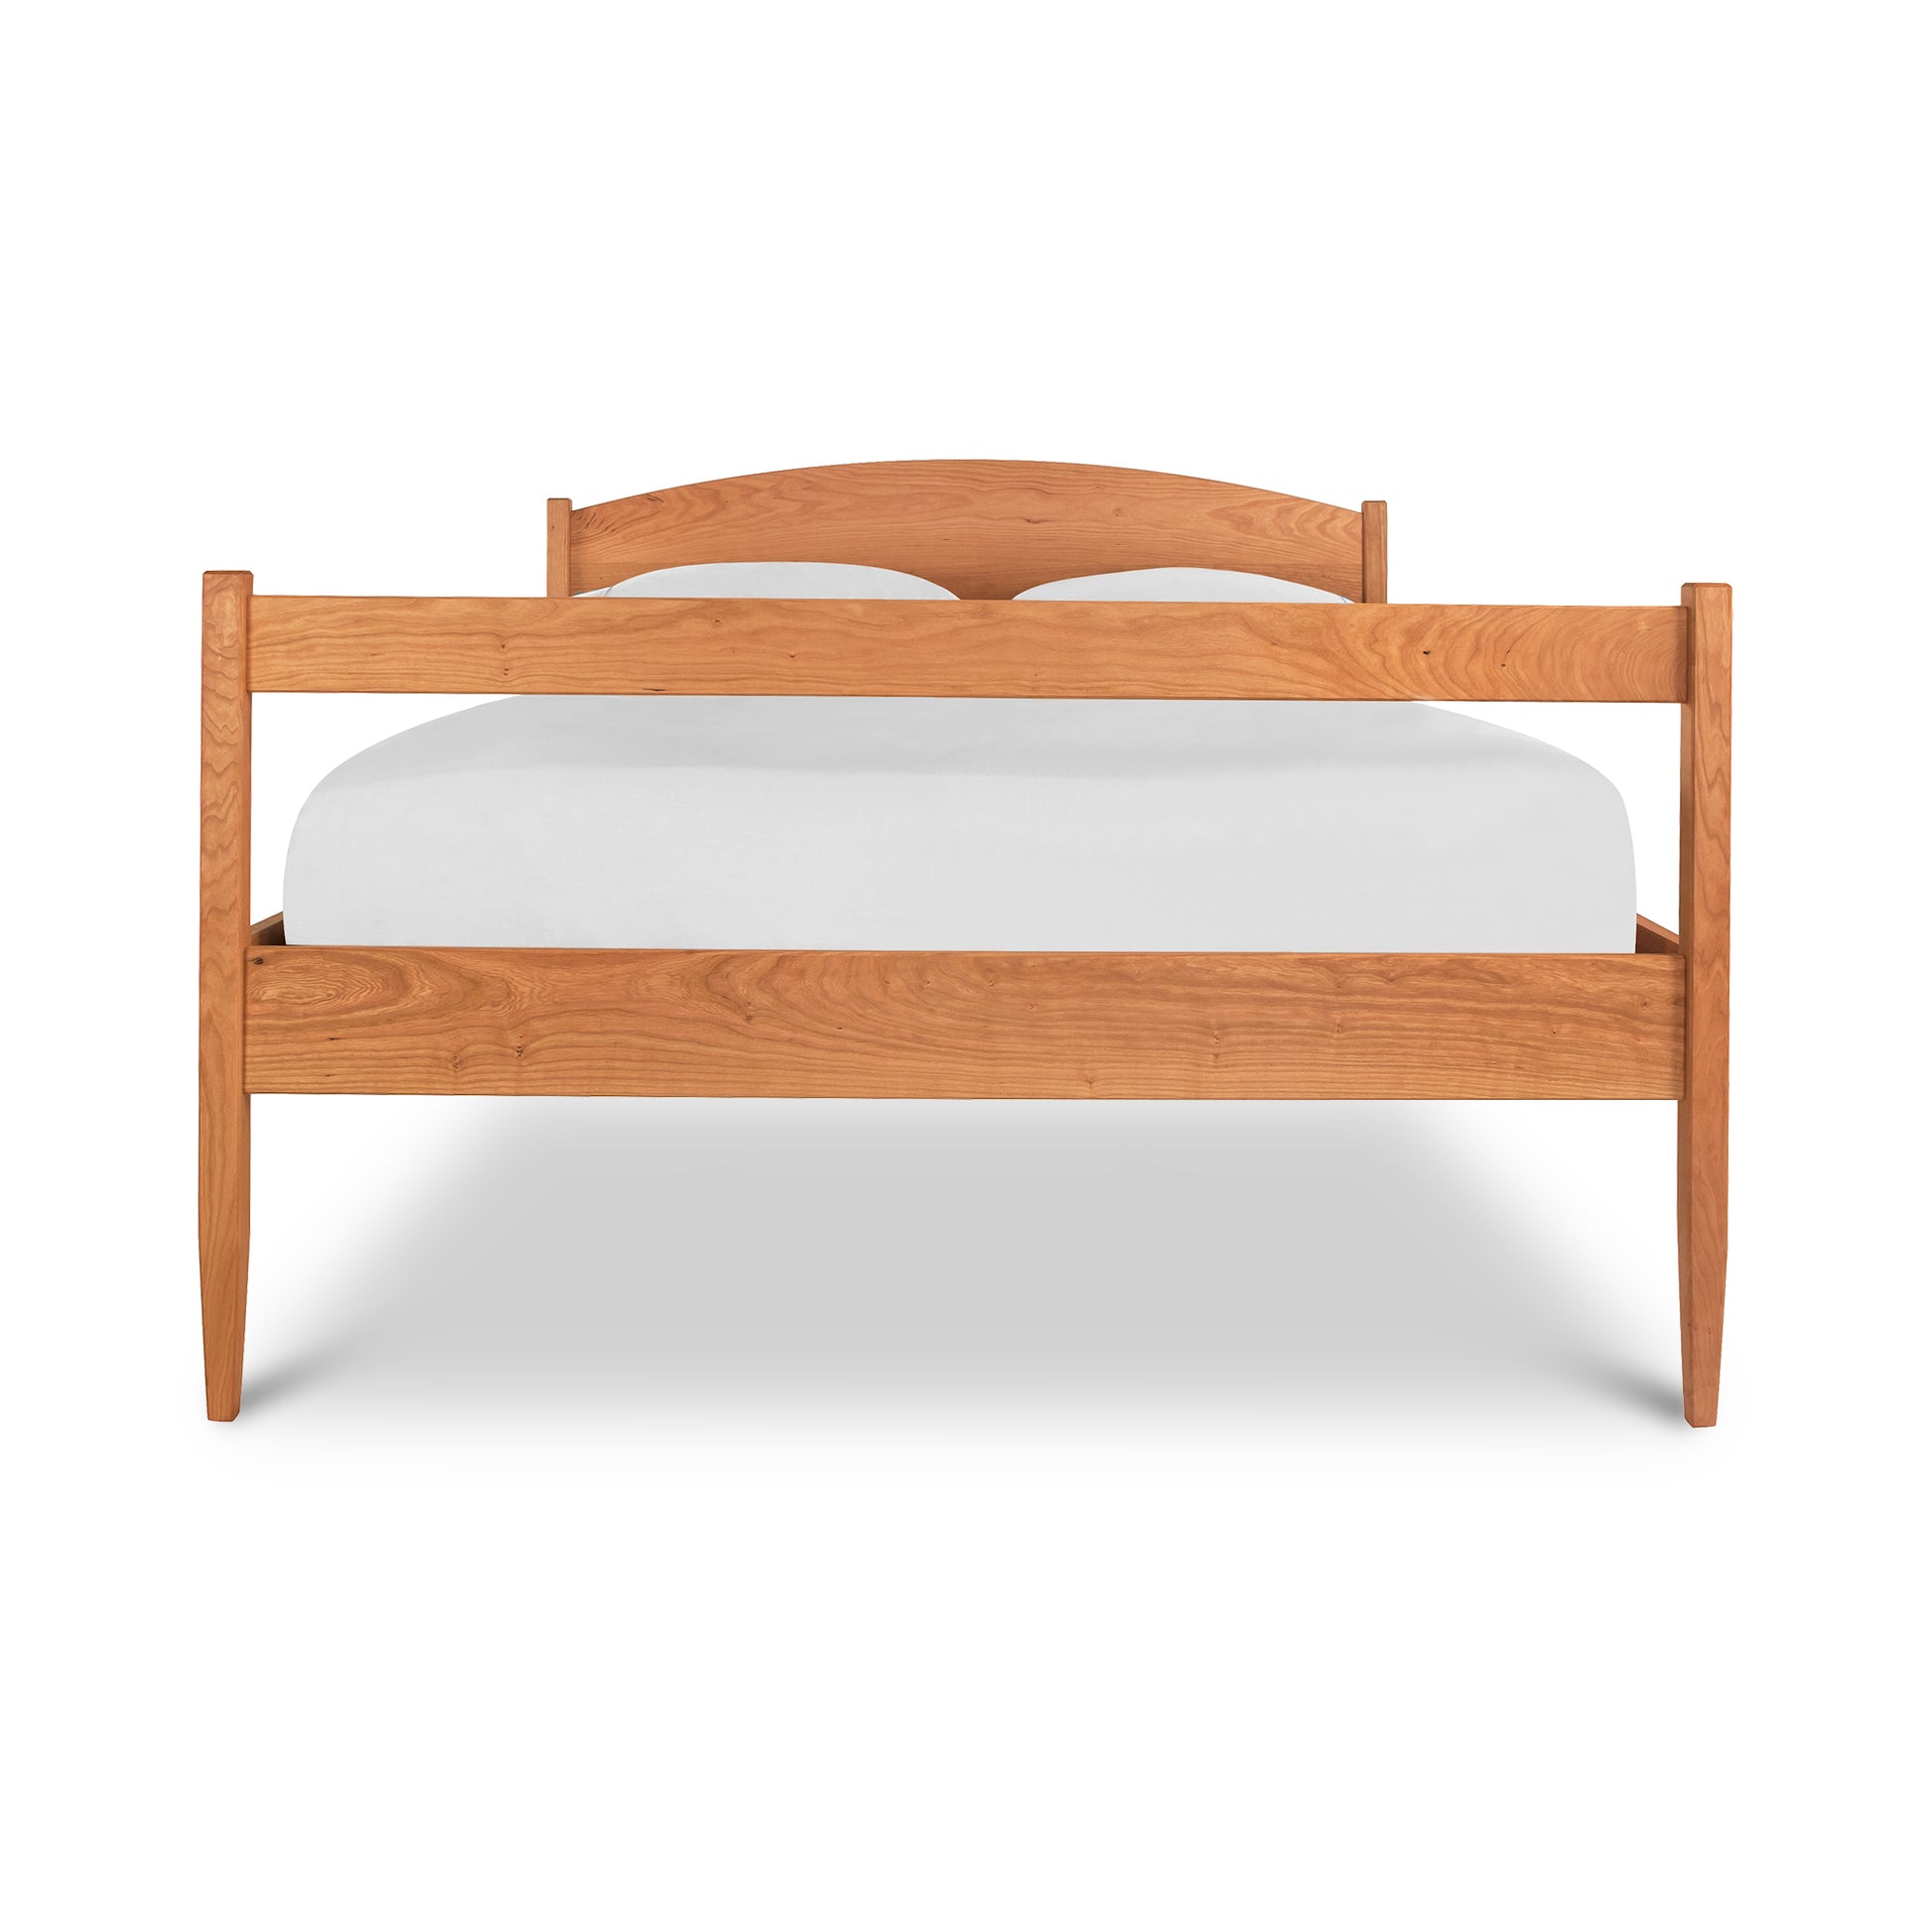 The Vermont Shaker Platform Bed from Maple Corner Woodworks is a solid hardwood bed handmade by Vermont furniture makers. With its white headboard and footboard, this wooden bed combines timeless style with superior craftsmanship.